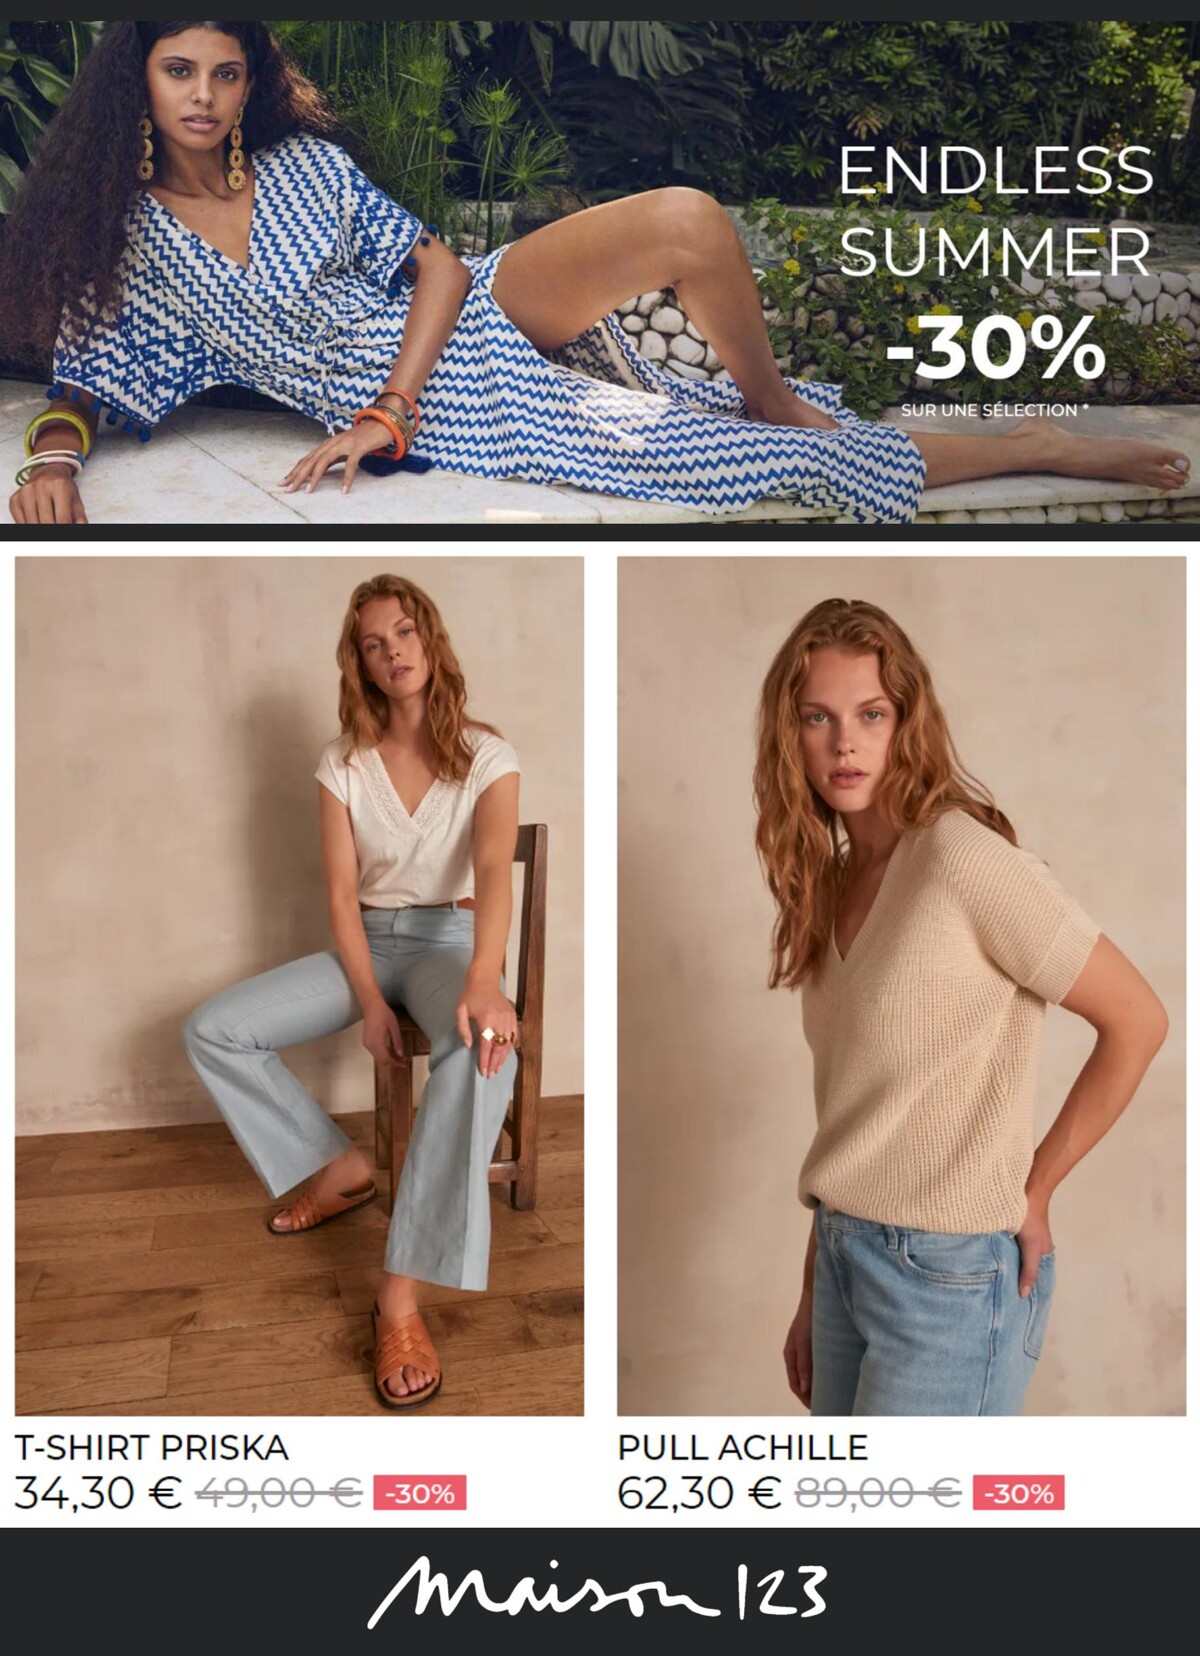 Catalogue Endless Summer -30%*, page 00005